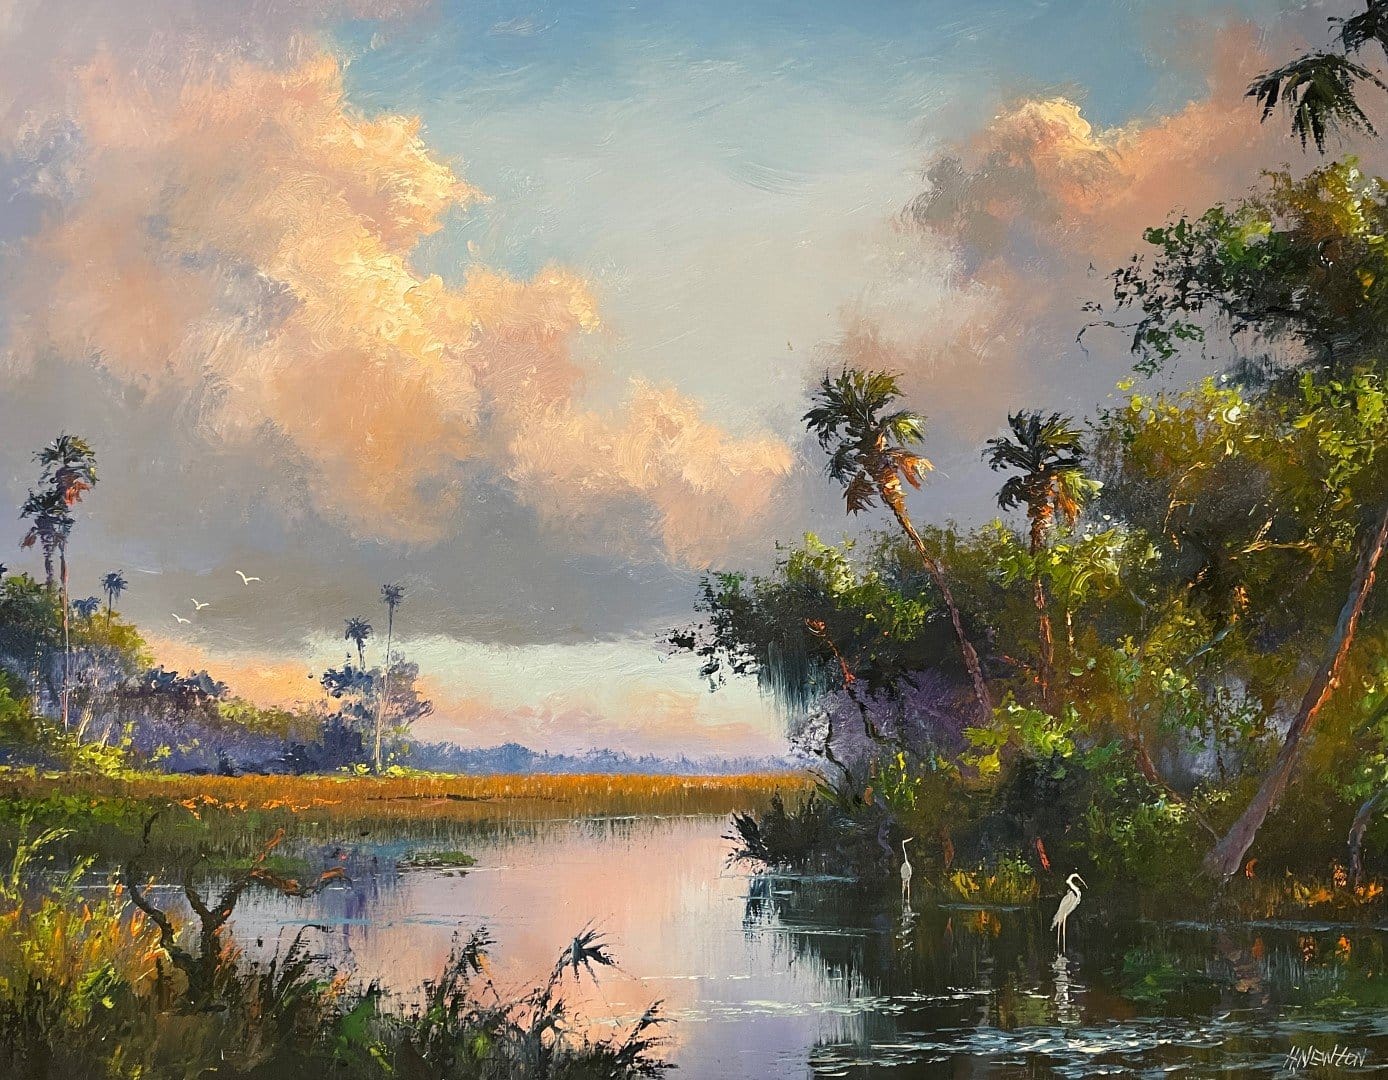 Art Exhibition taking place in Winter Haven 22/05/22 - 12/02/22 | 800 E Palmetto St Lakeland FL 33801 | Art Of the Highwaymen | WOODSBY FAMILY COLLECTION | Orlando south